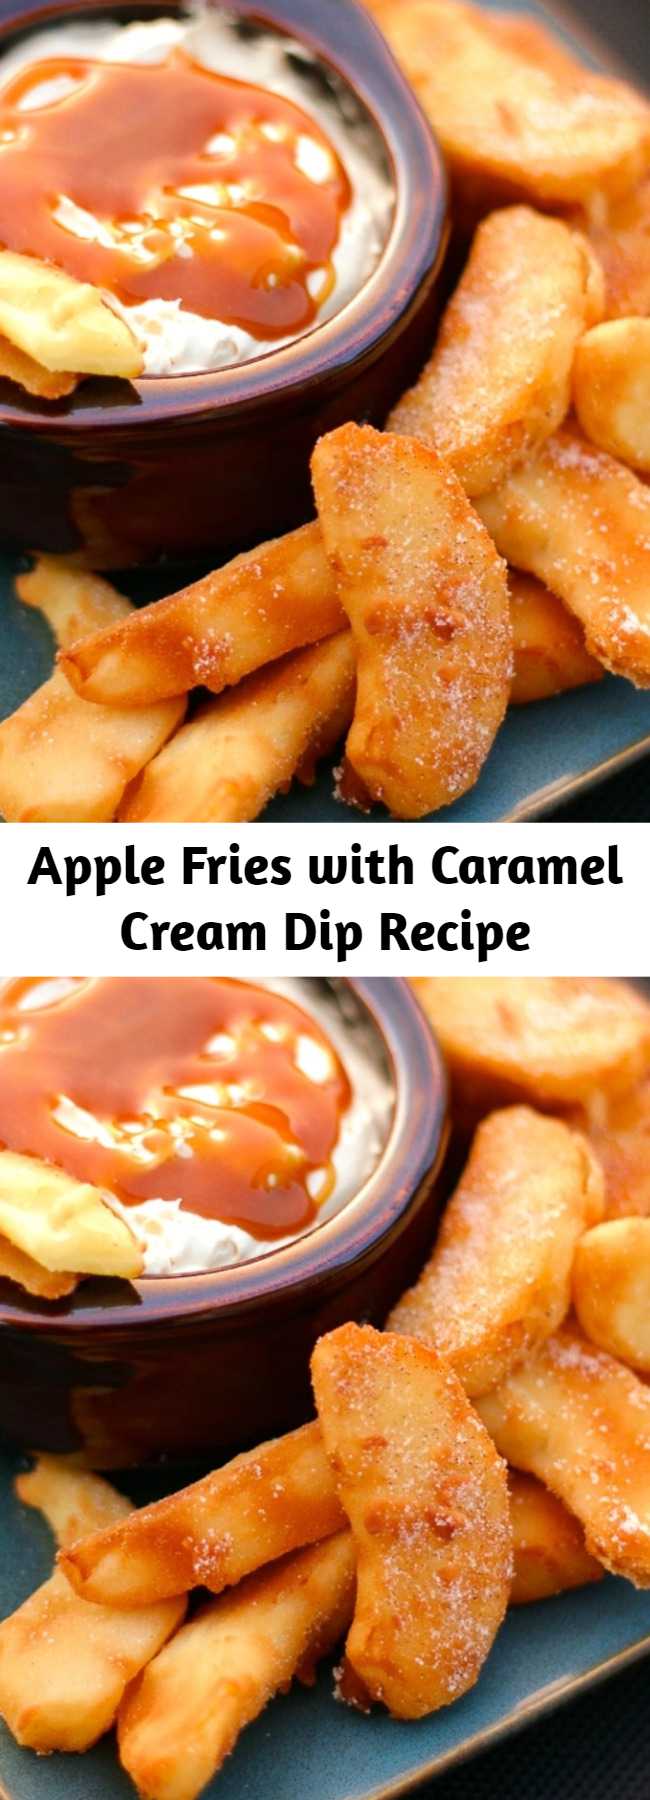 Apple Fries with Caramel Cream Dip Recipe - These Apple Fries with Caramel Cream Dip are the perfect warm dessert for a crisp fall evening. It made our house smell like apple pie. Crisp apple wedges are lightly battered and fried in a pan, then sprinkled with a cinnamon-sugar mix. What really sets these fried apples apart is the dipping sauce. You’ll love this creamy, caramel-infused dip.